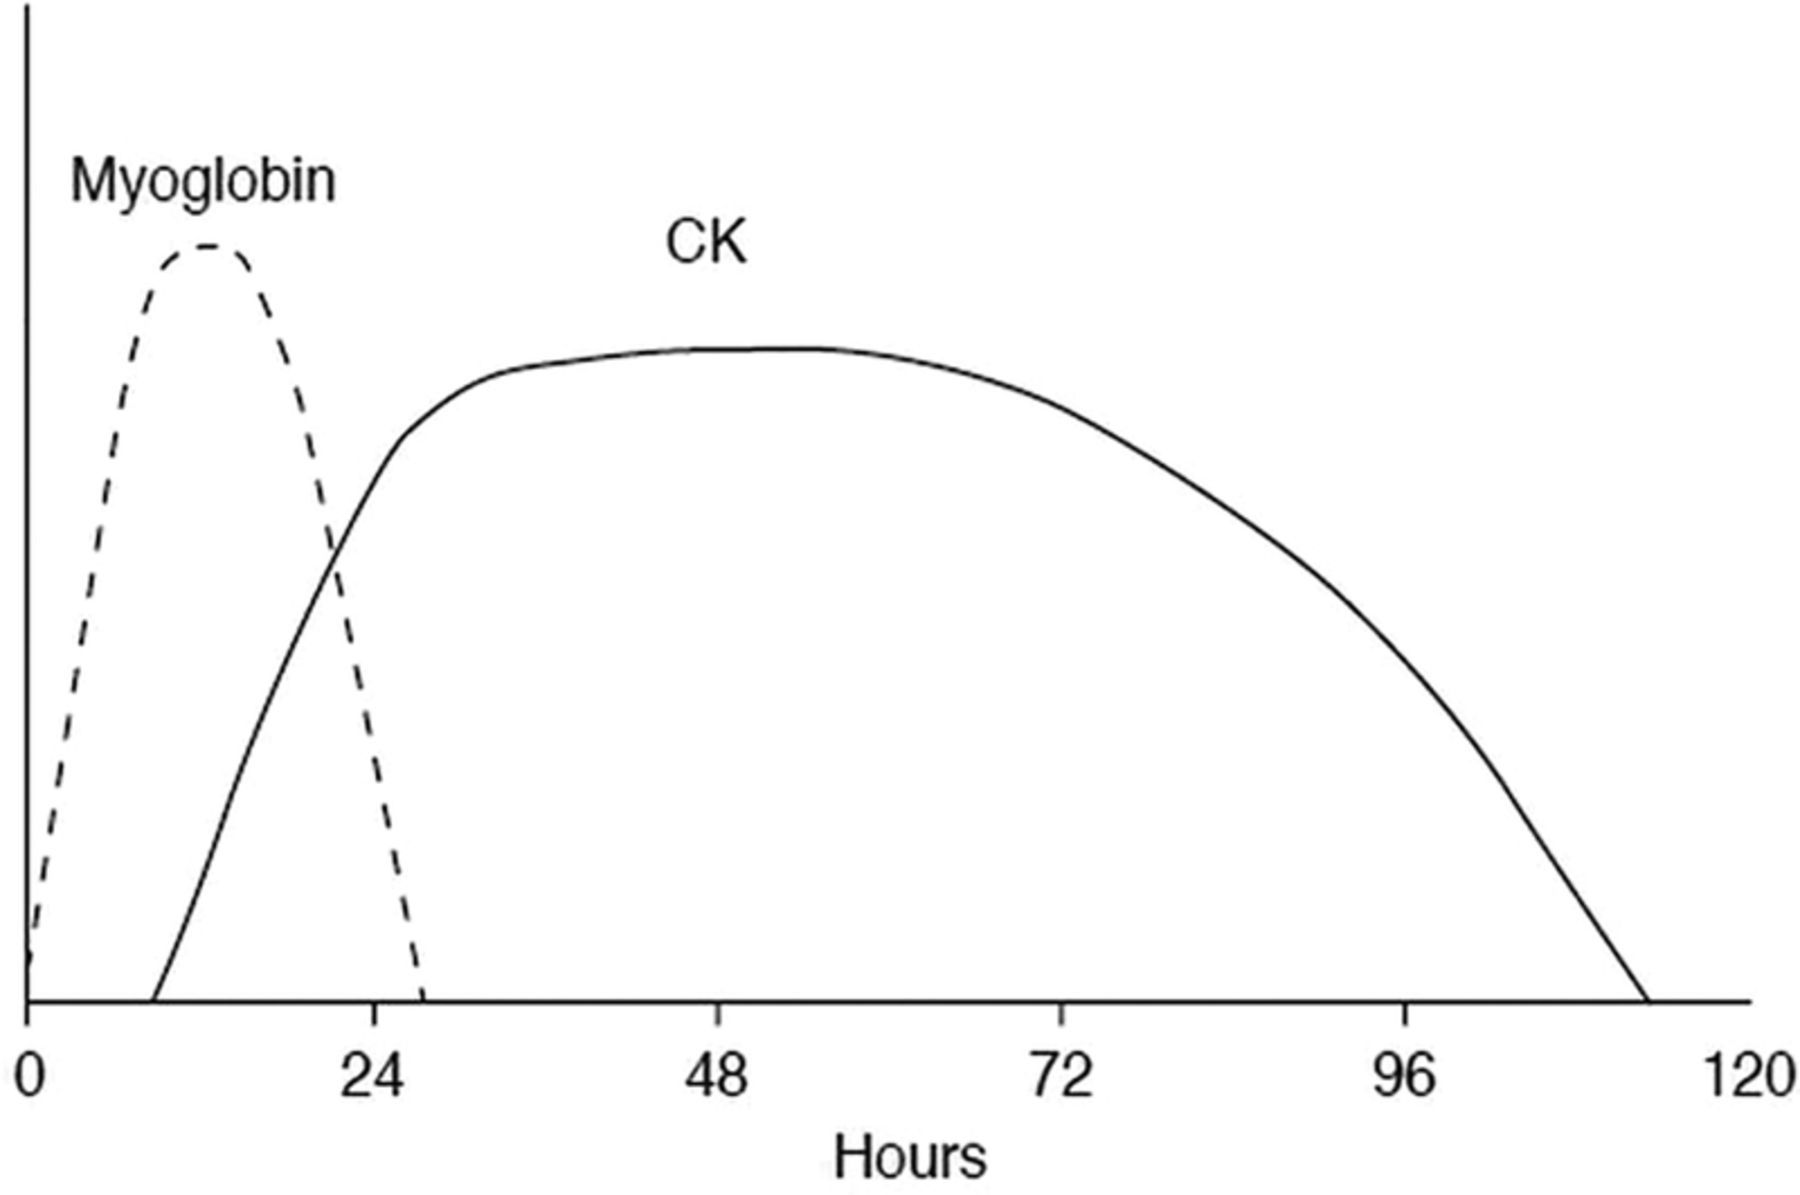 Rise and fall of myoglobin and creatine kinase (CK) during the course of rhabdomyolysis